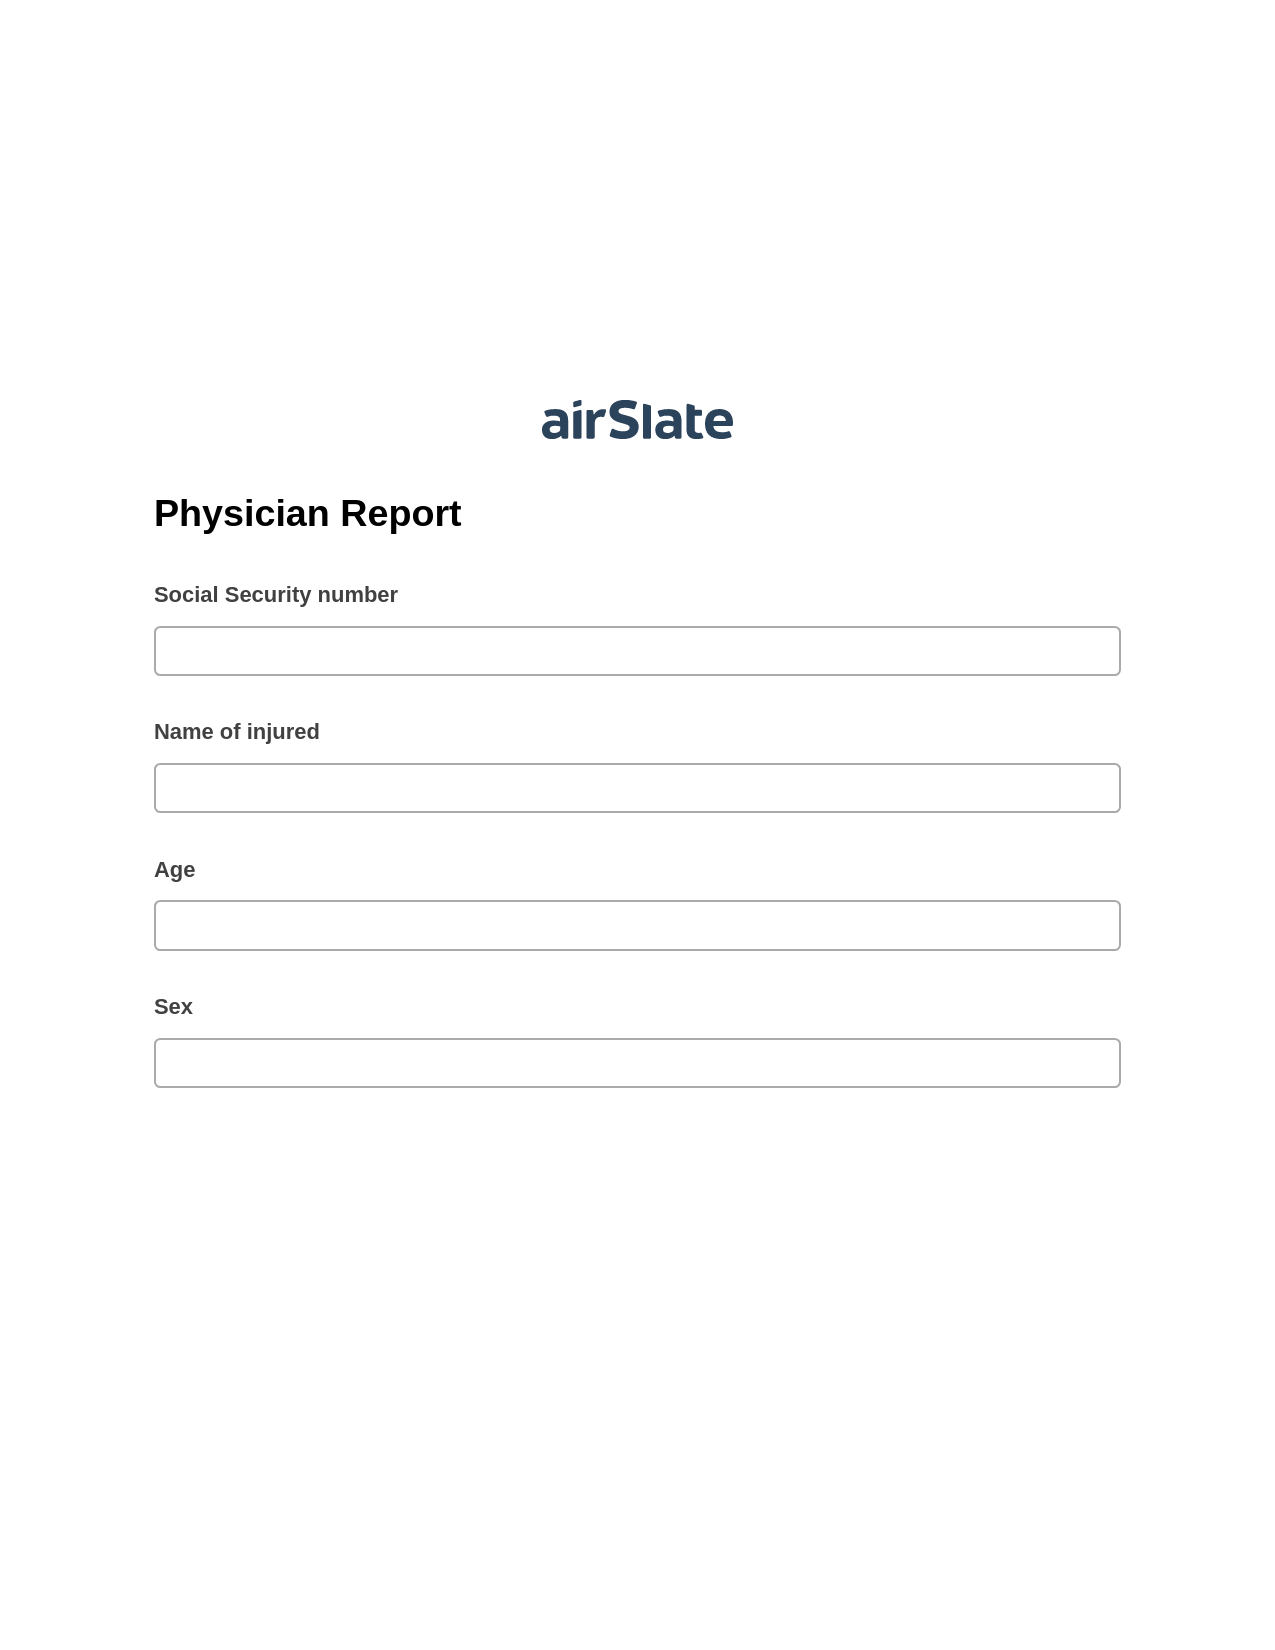 Multirole Physician Report Pre-fill from CSV File Bot, Unassign Role Bot, Slack Notification Postfinish Bot